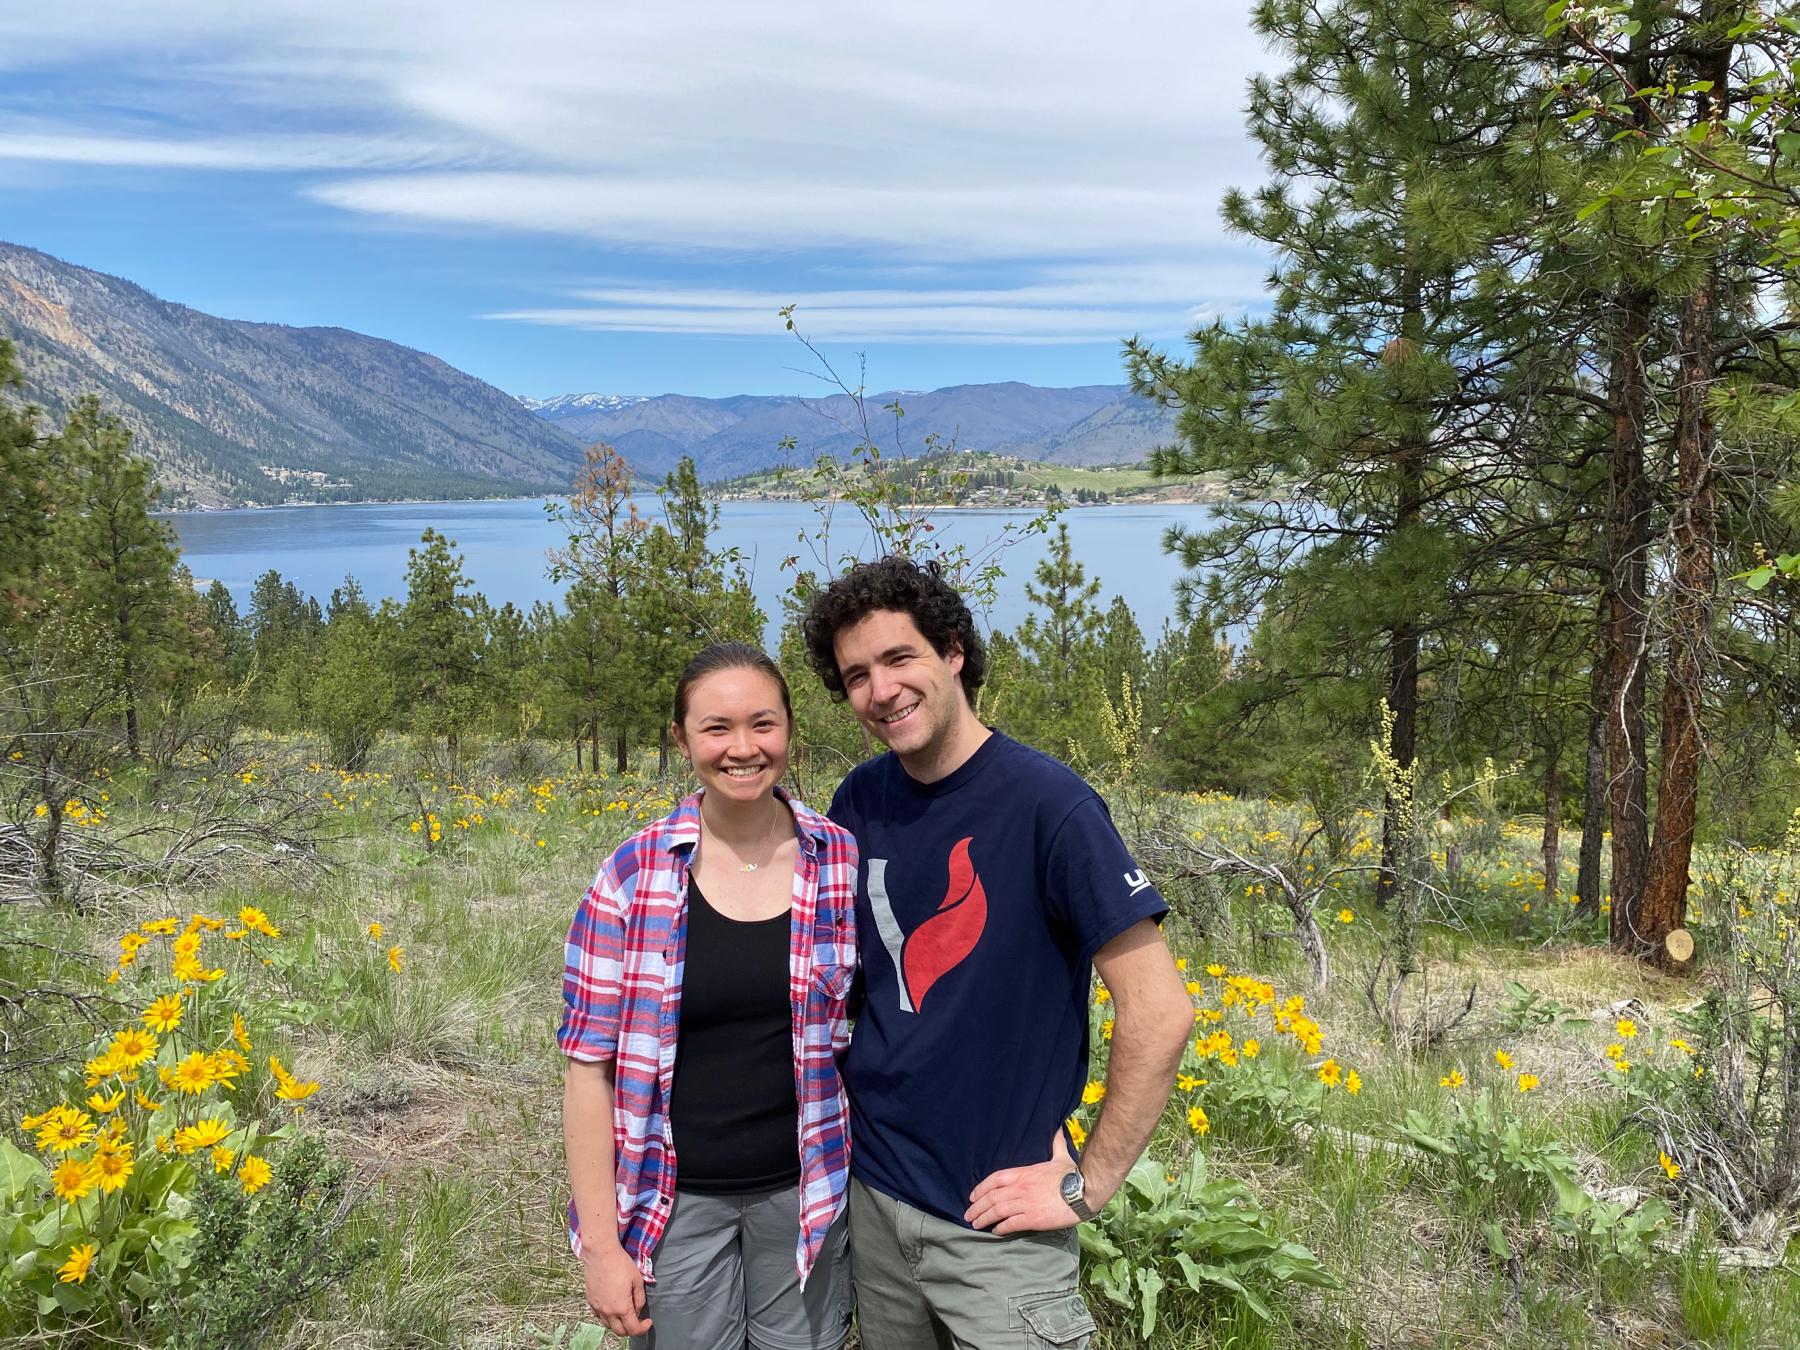 Little Bear Trail with Lake Chelan in the background - May 2021